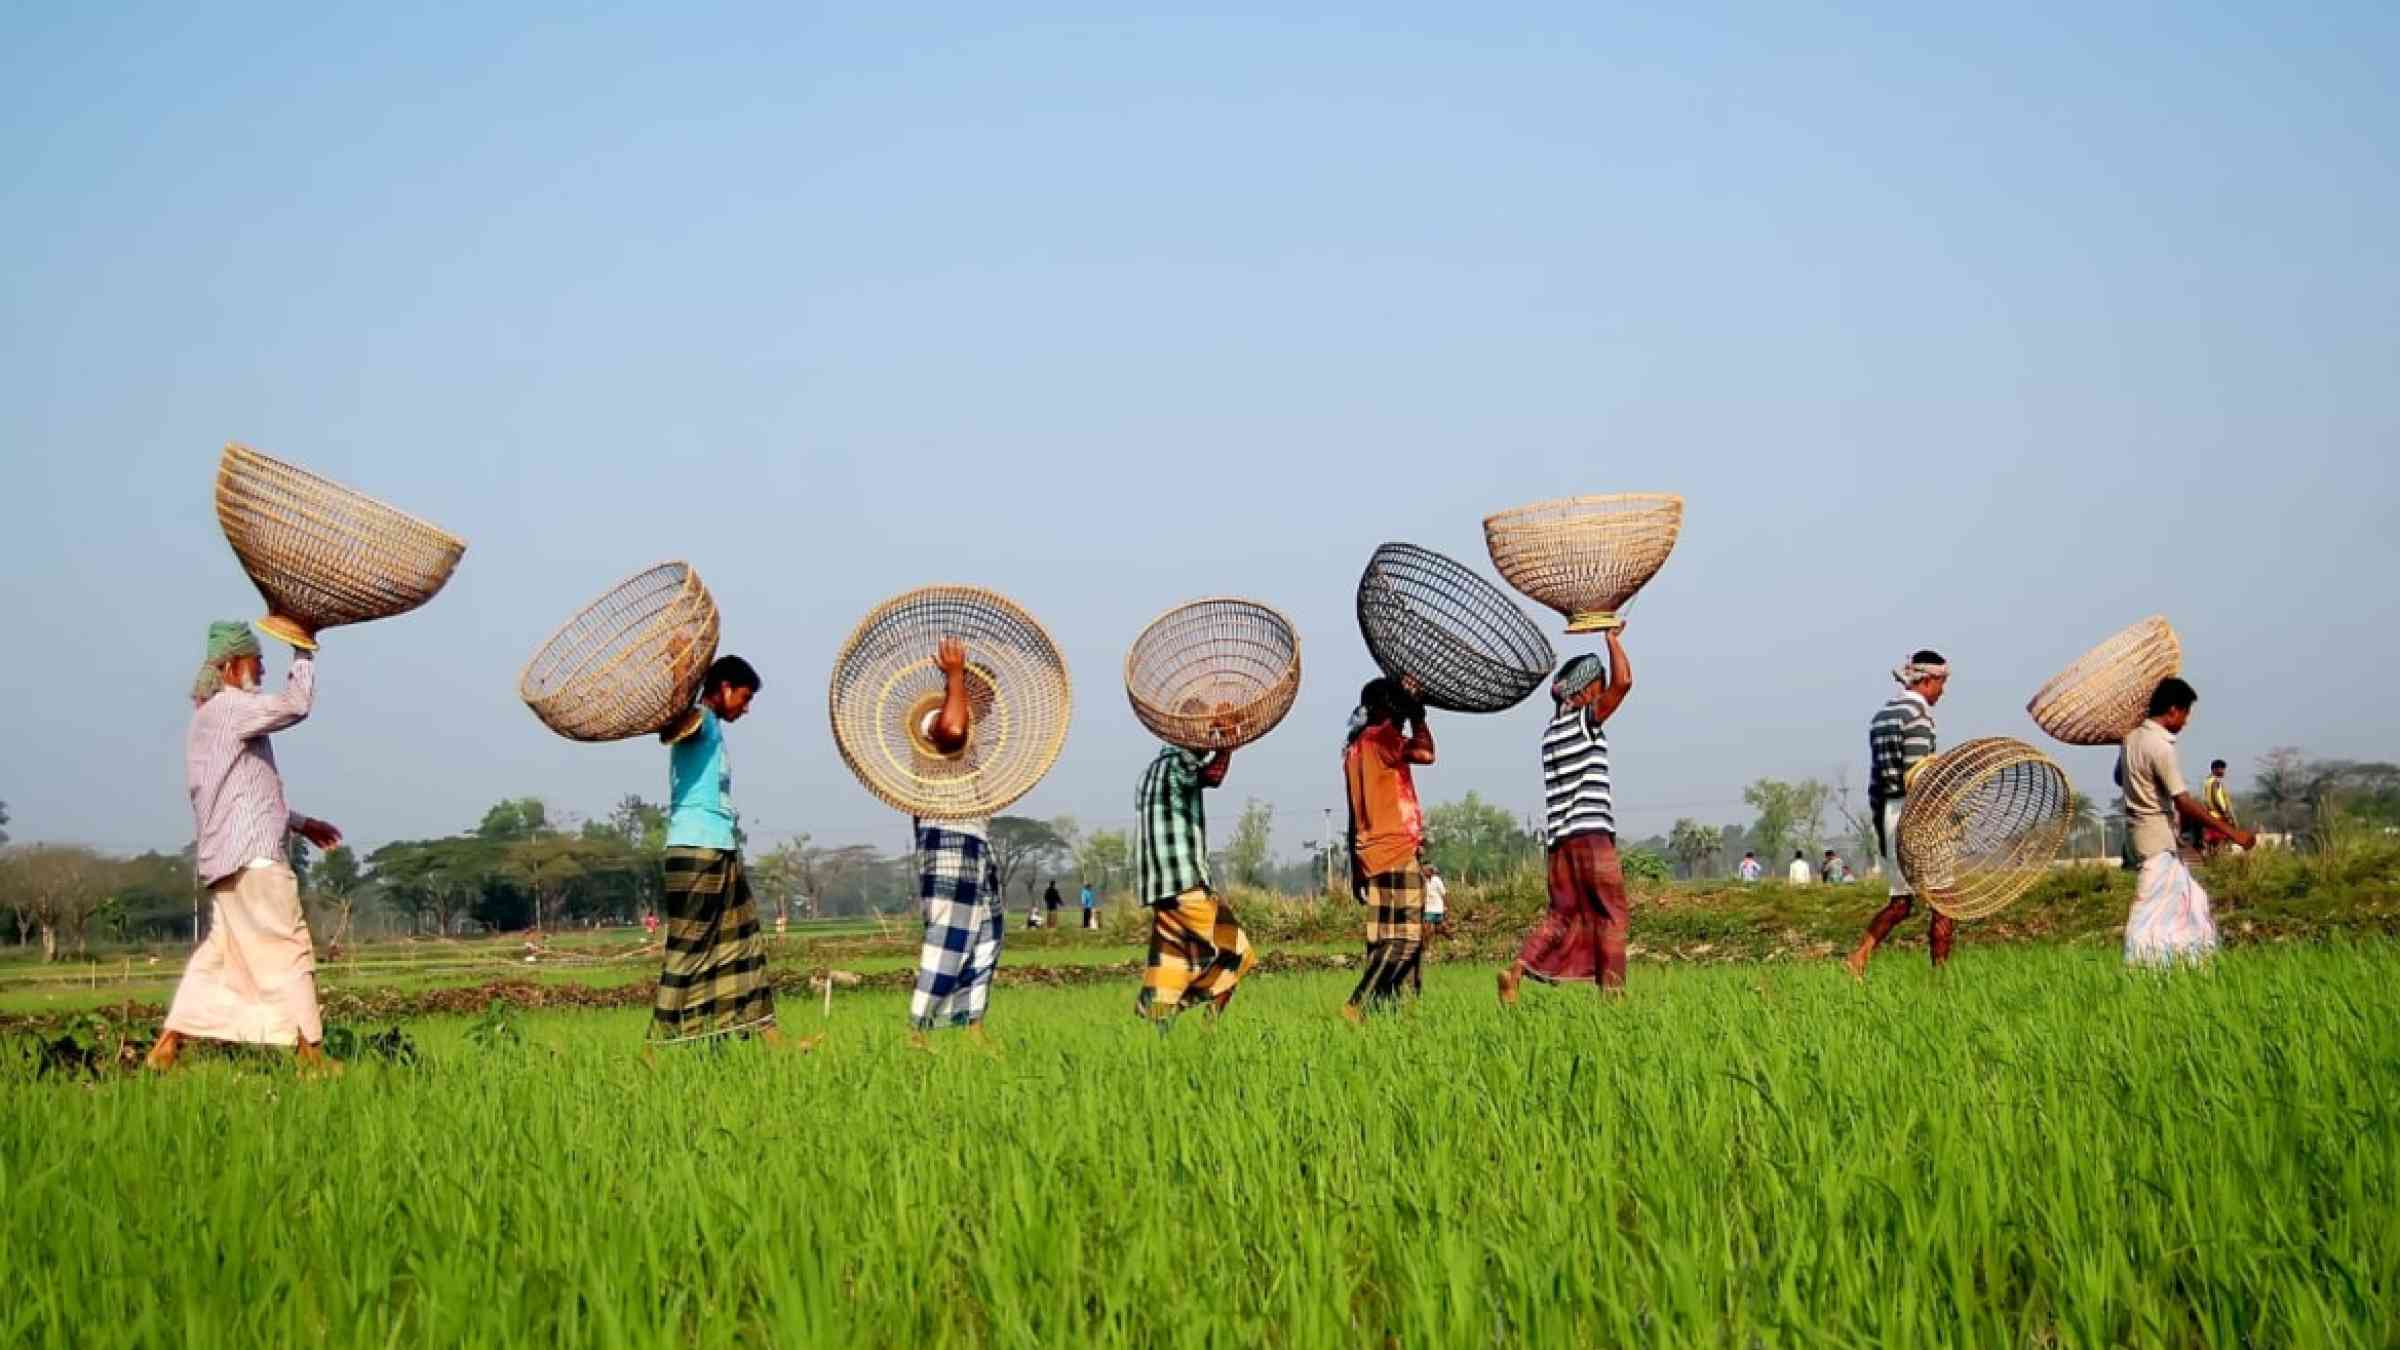 Eight farmers from Bangladesh walking across a rice field carrying big baskets on their heads and shoulders.